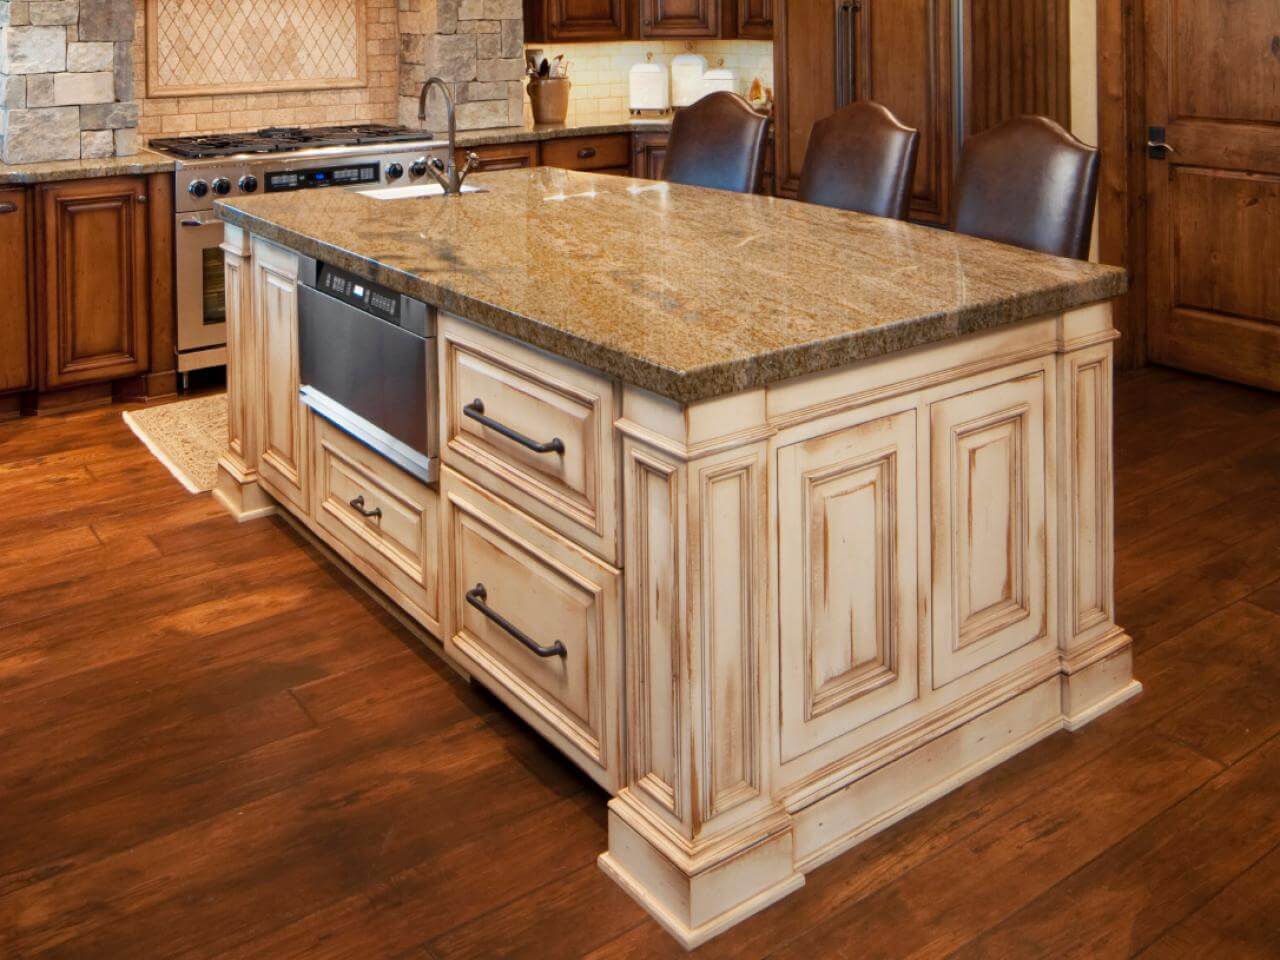 Finding The Right Kitchen Island Scott Hall Remodeling